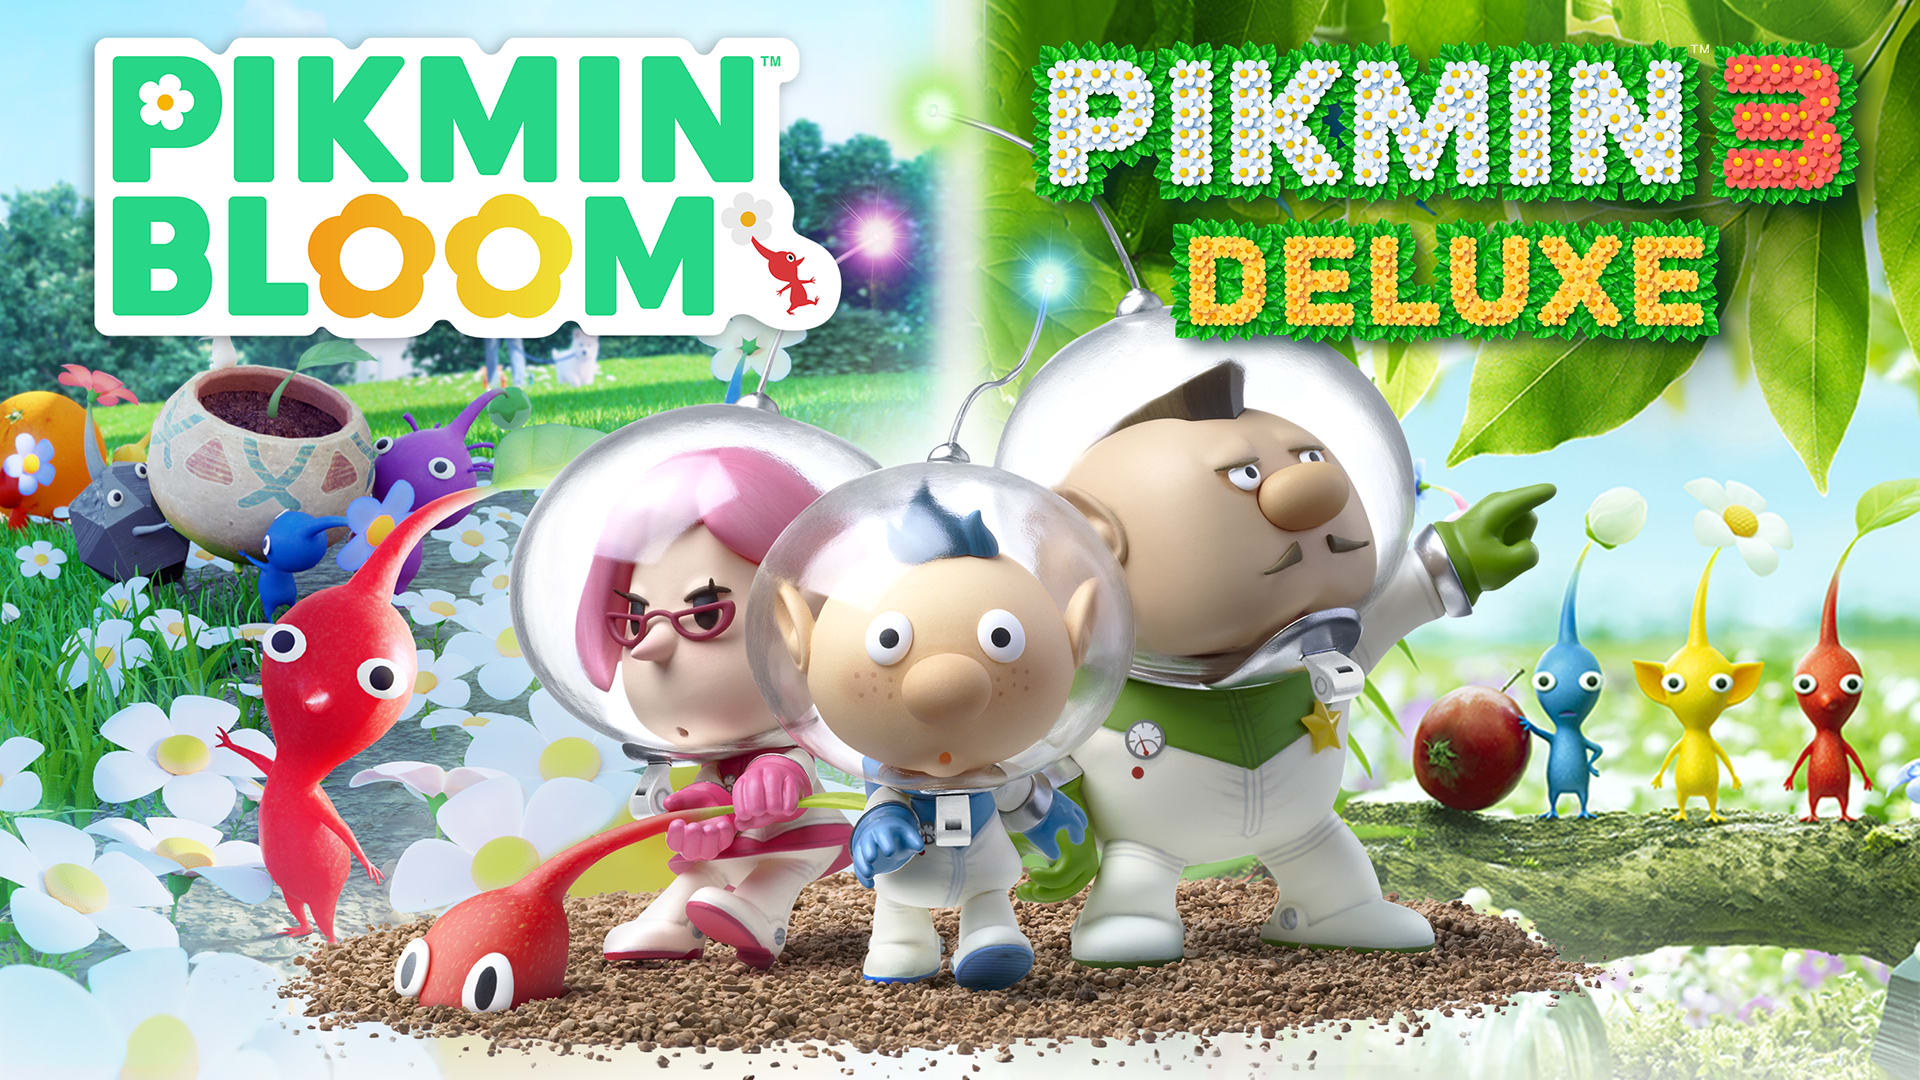 Pikmin Bloom is celebrating its first anniversary with a Pikmin 3 Deluxe event, on now! Hero Banner